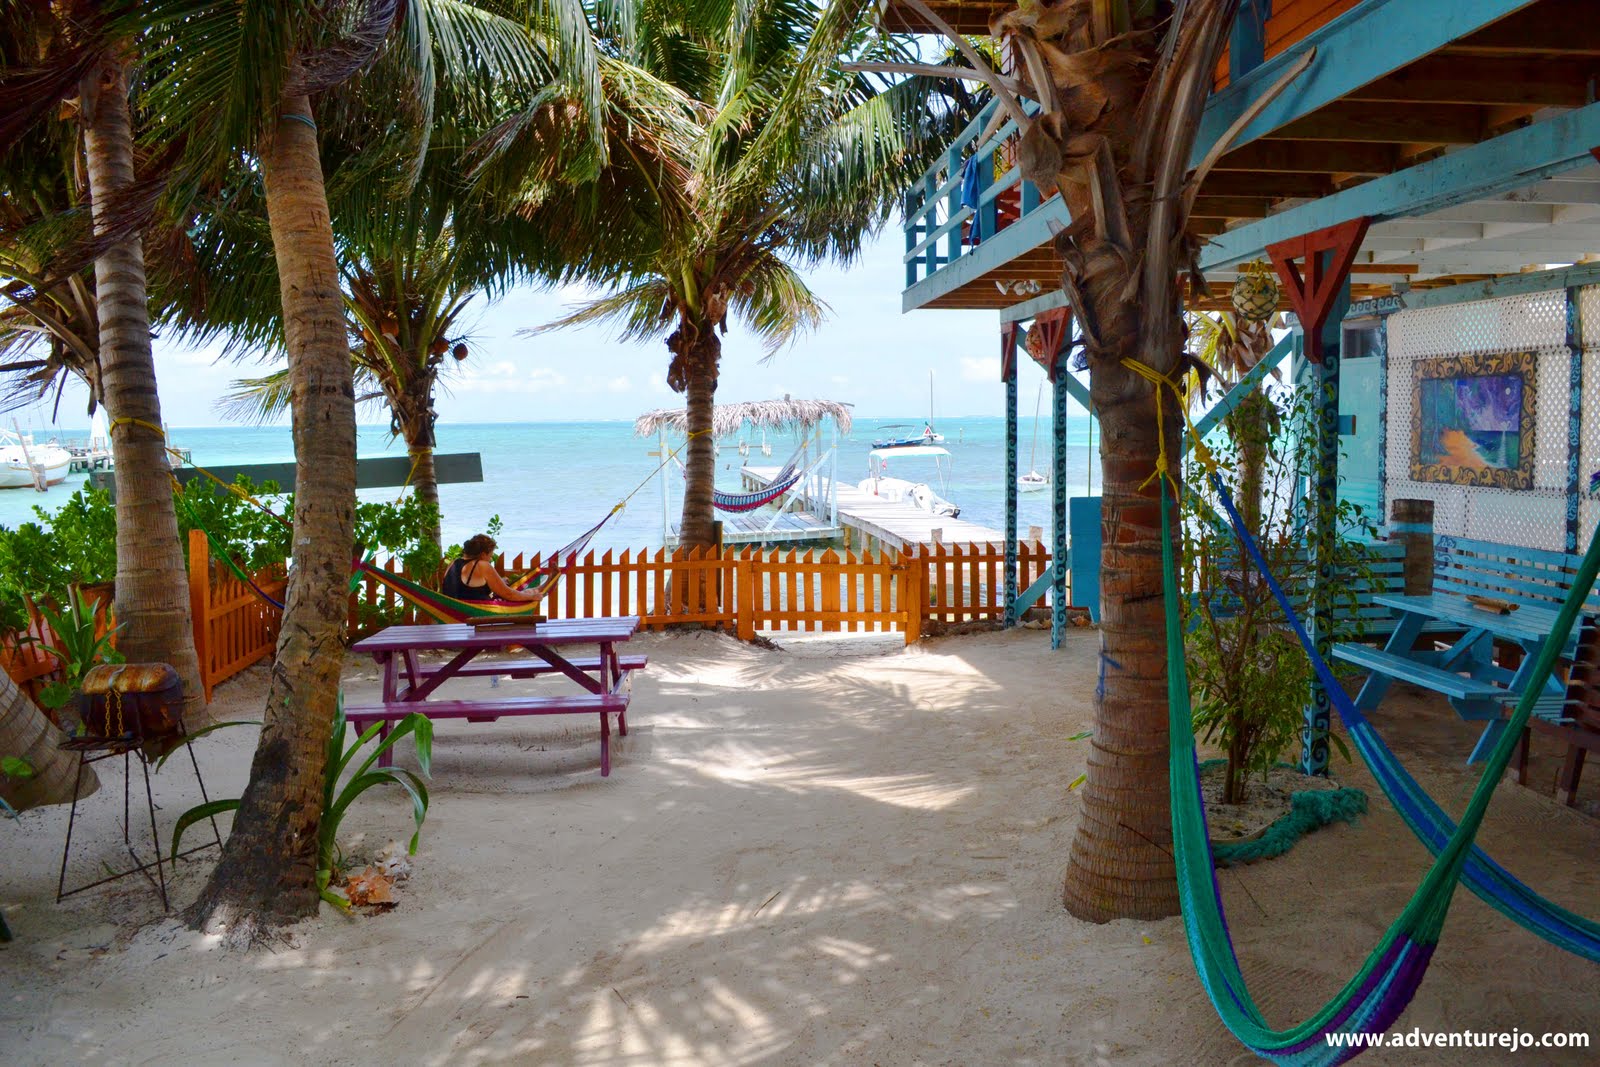 Where to stay in Caye Caulker, Belize? Yuma’s House or Bella’s?